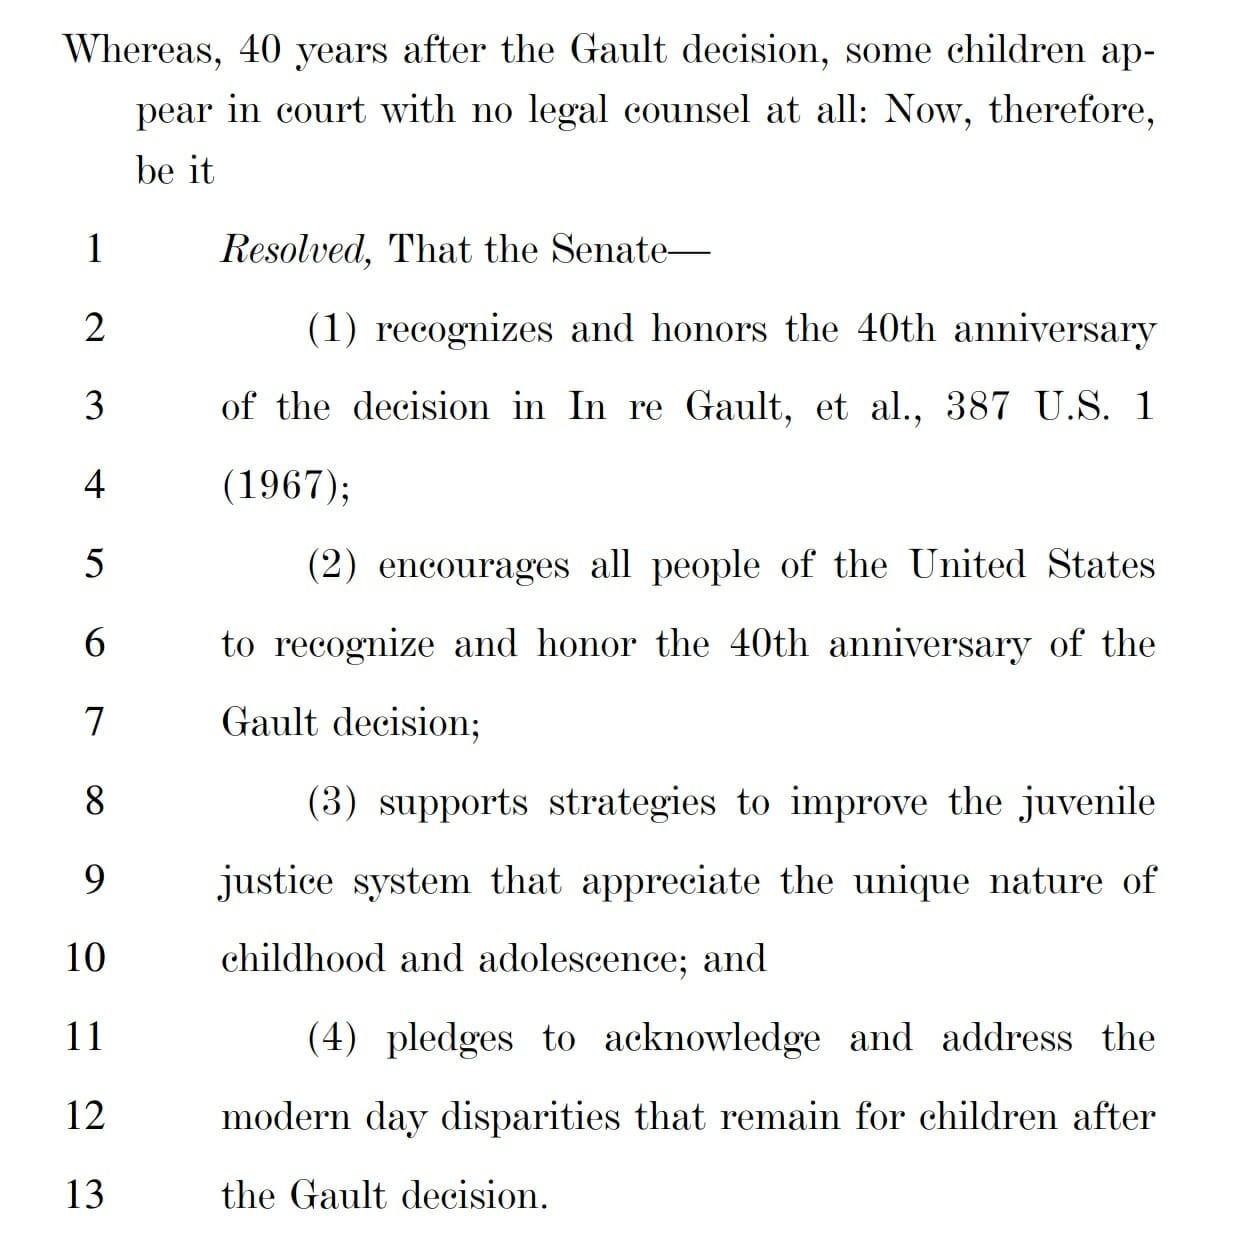 “Resolution commemorating the 40th anniversary of the landmark case In Re Gault…” S.Res.194, 110th Cong., 1st sess., (May 11, 2007), https://www.congress.gov/bill/110th-congress/senate-resolution/194/text. 